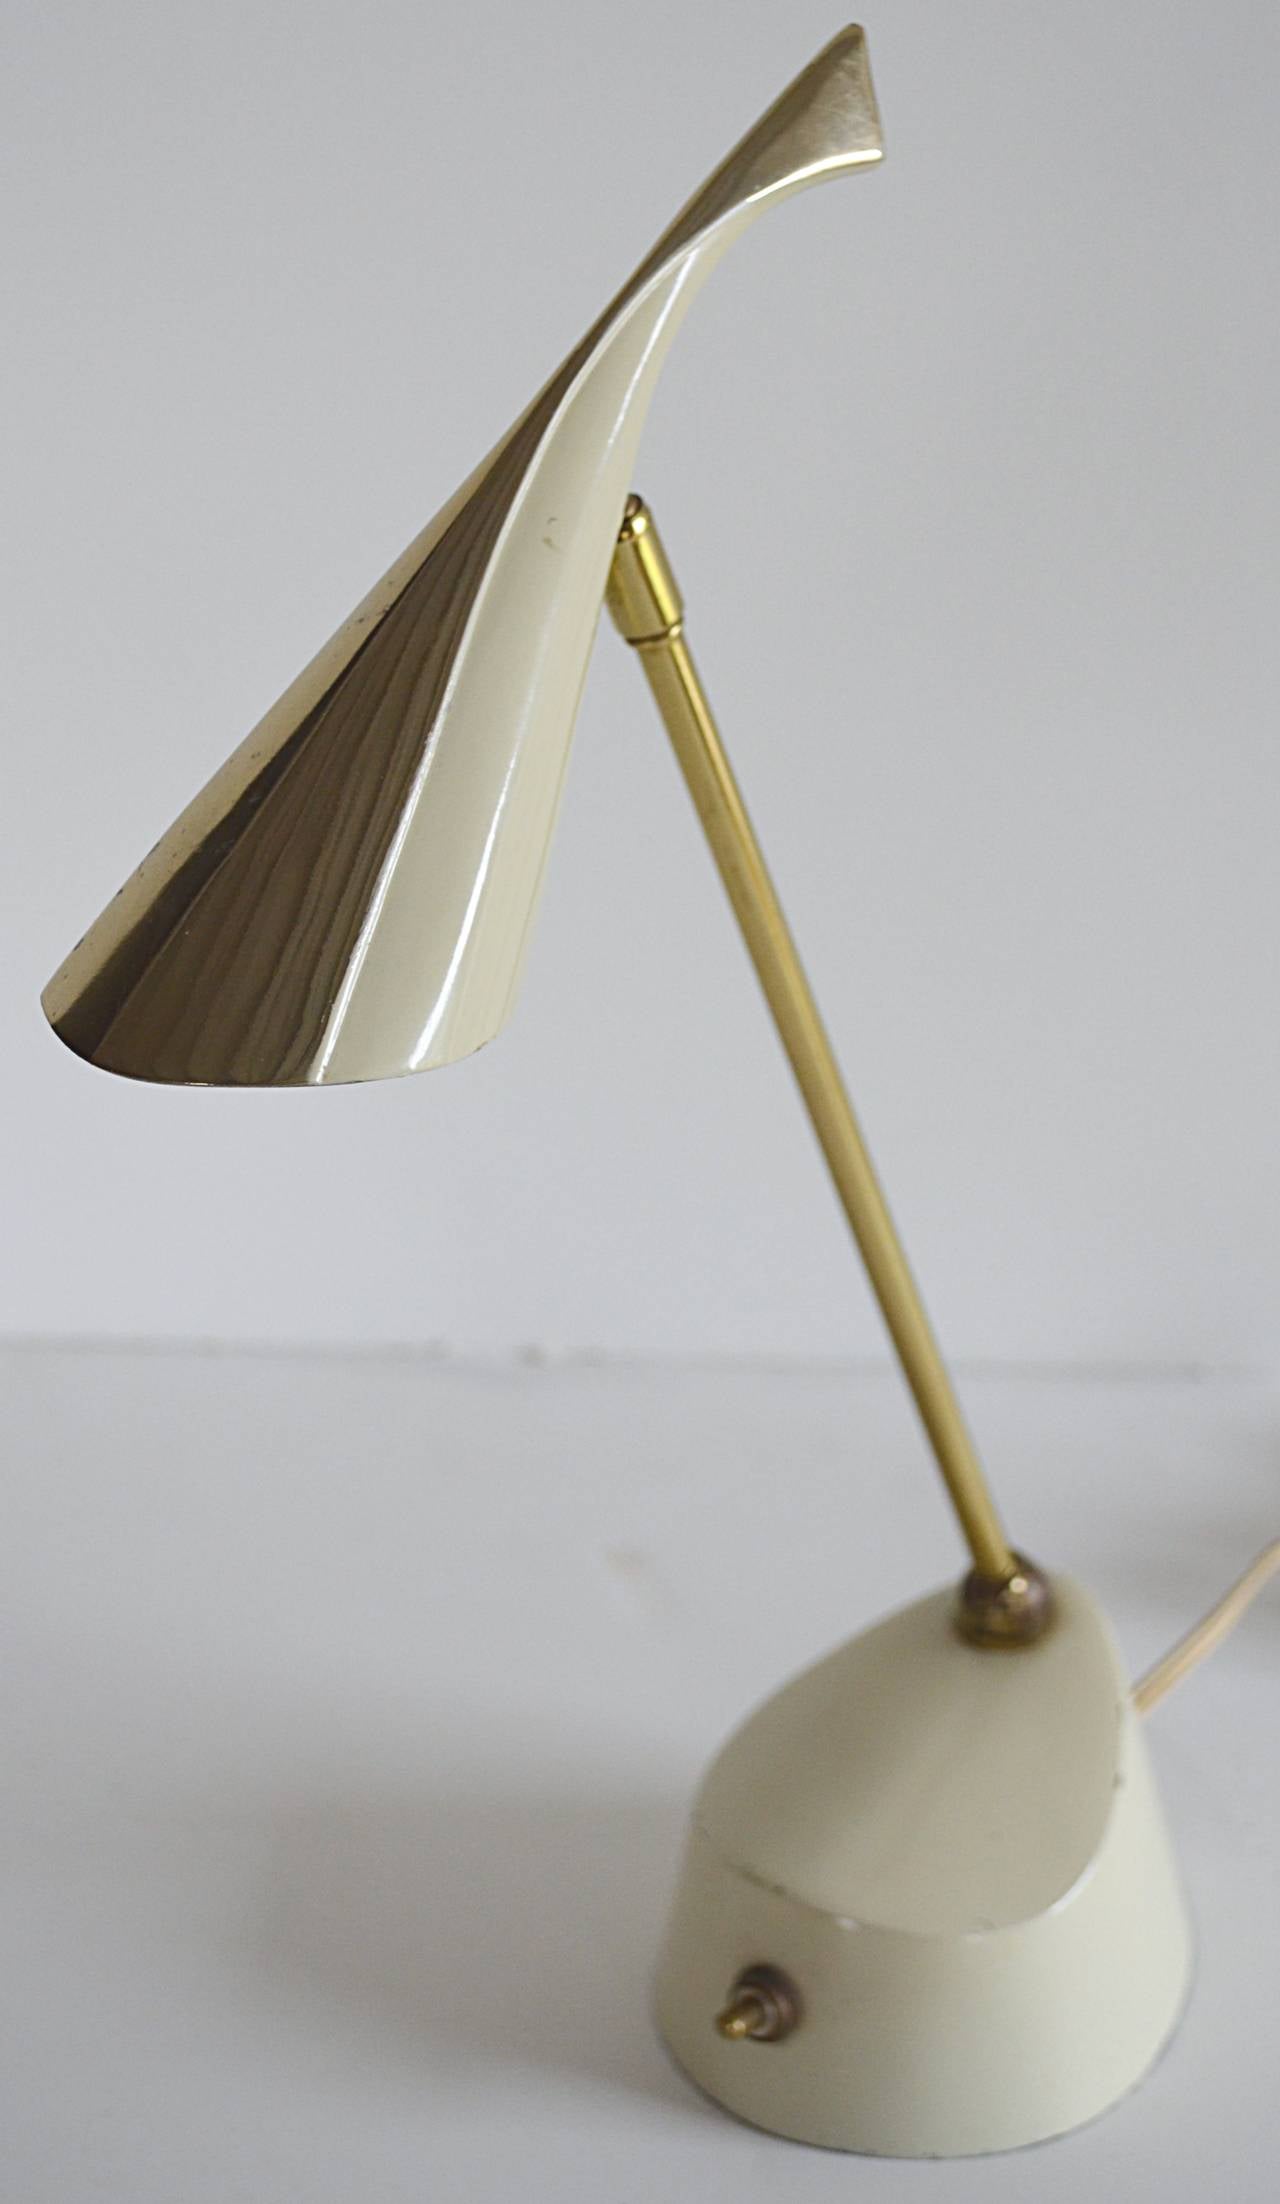 This little gem can be used as a desk lamp or hang on the wall as a sconce. The bone white enameled weighted base supports a brass pivoting shaft and pivoting biomorphic shade in brass and bone enamel. Original wiring.